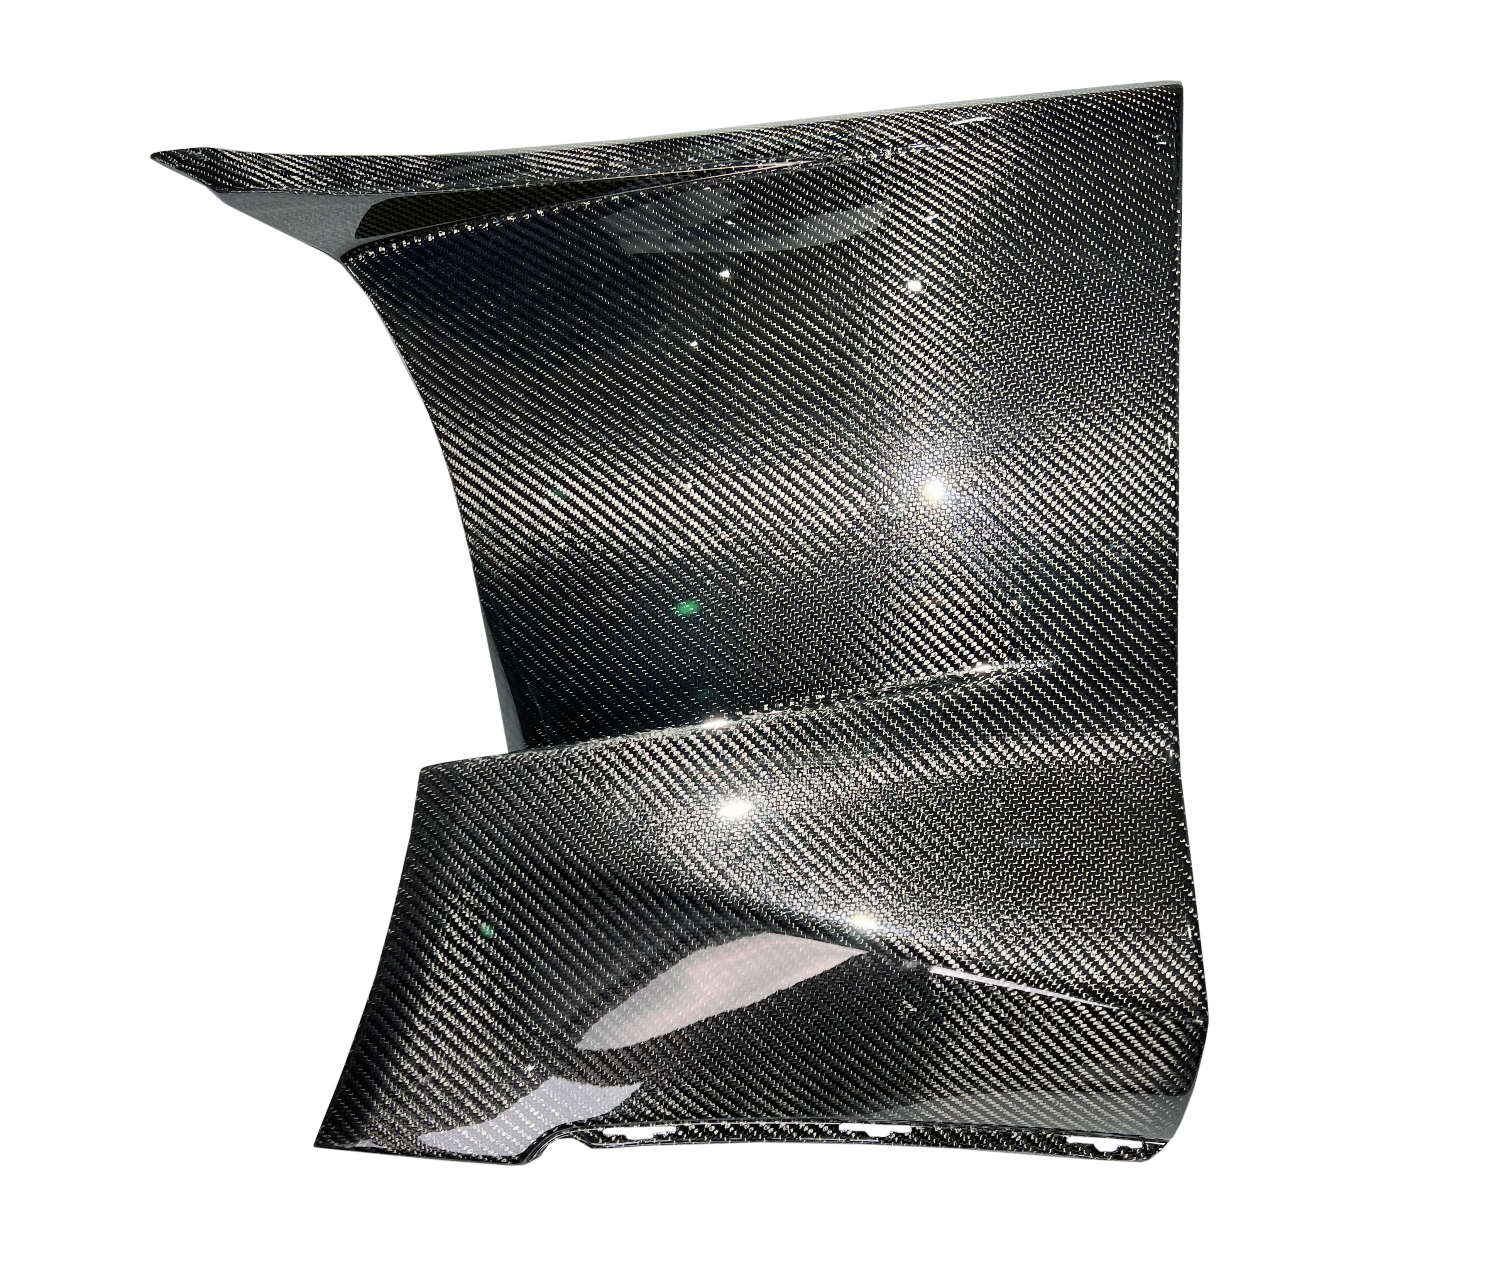 Rexpeed V6 Painted Front Fender Duct Panels (MK5 Supra)